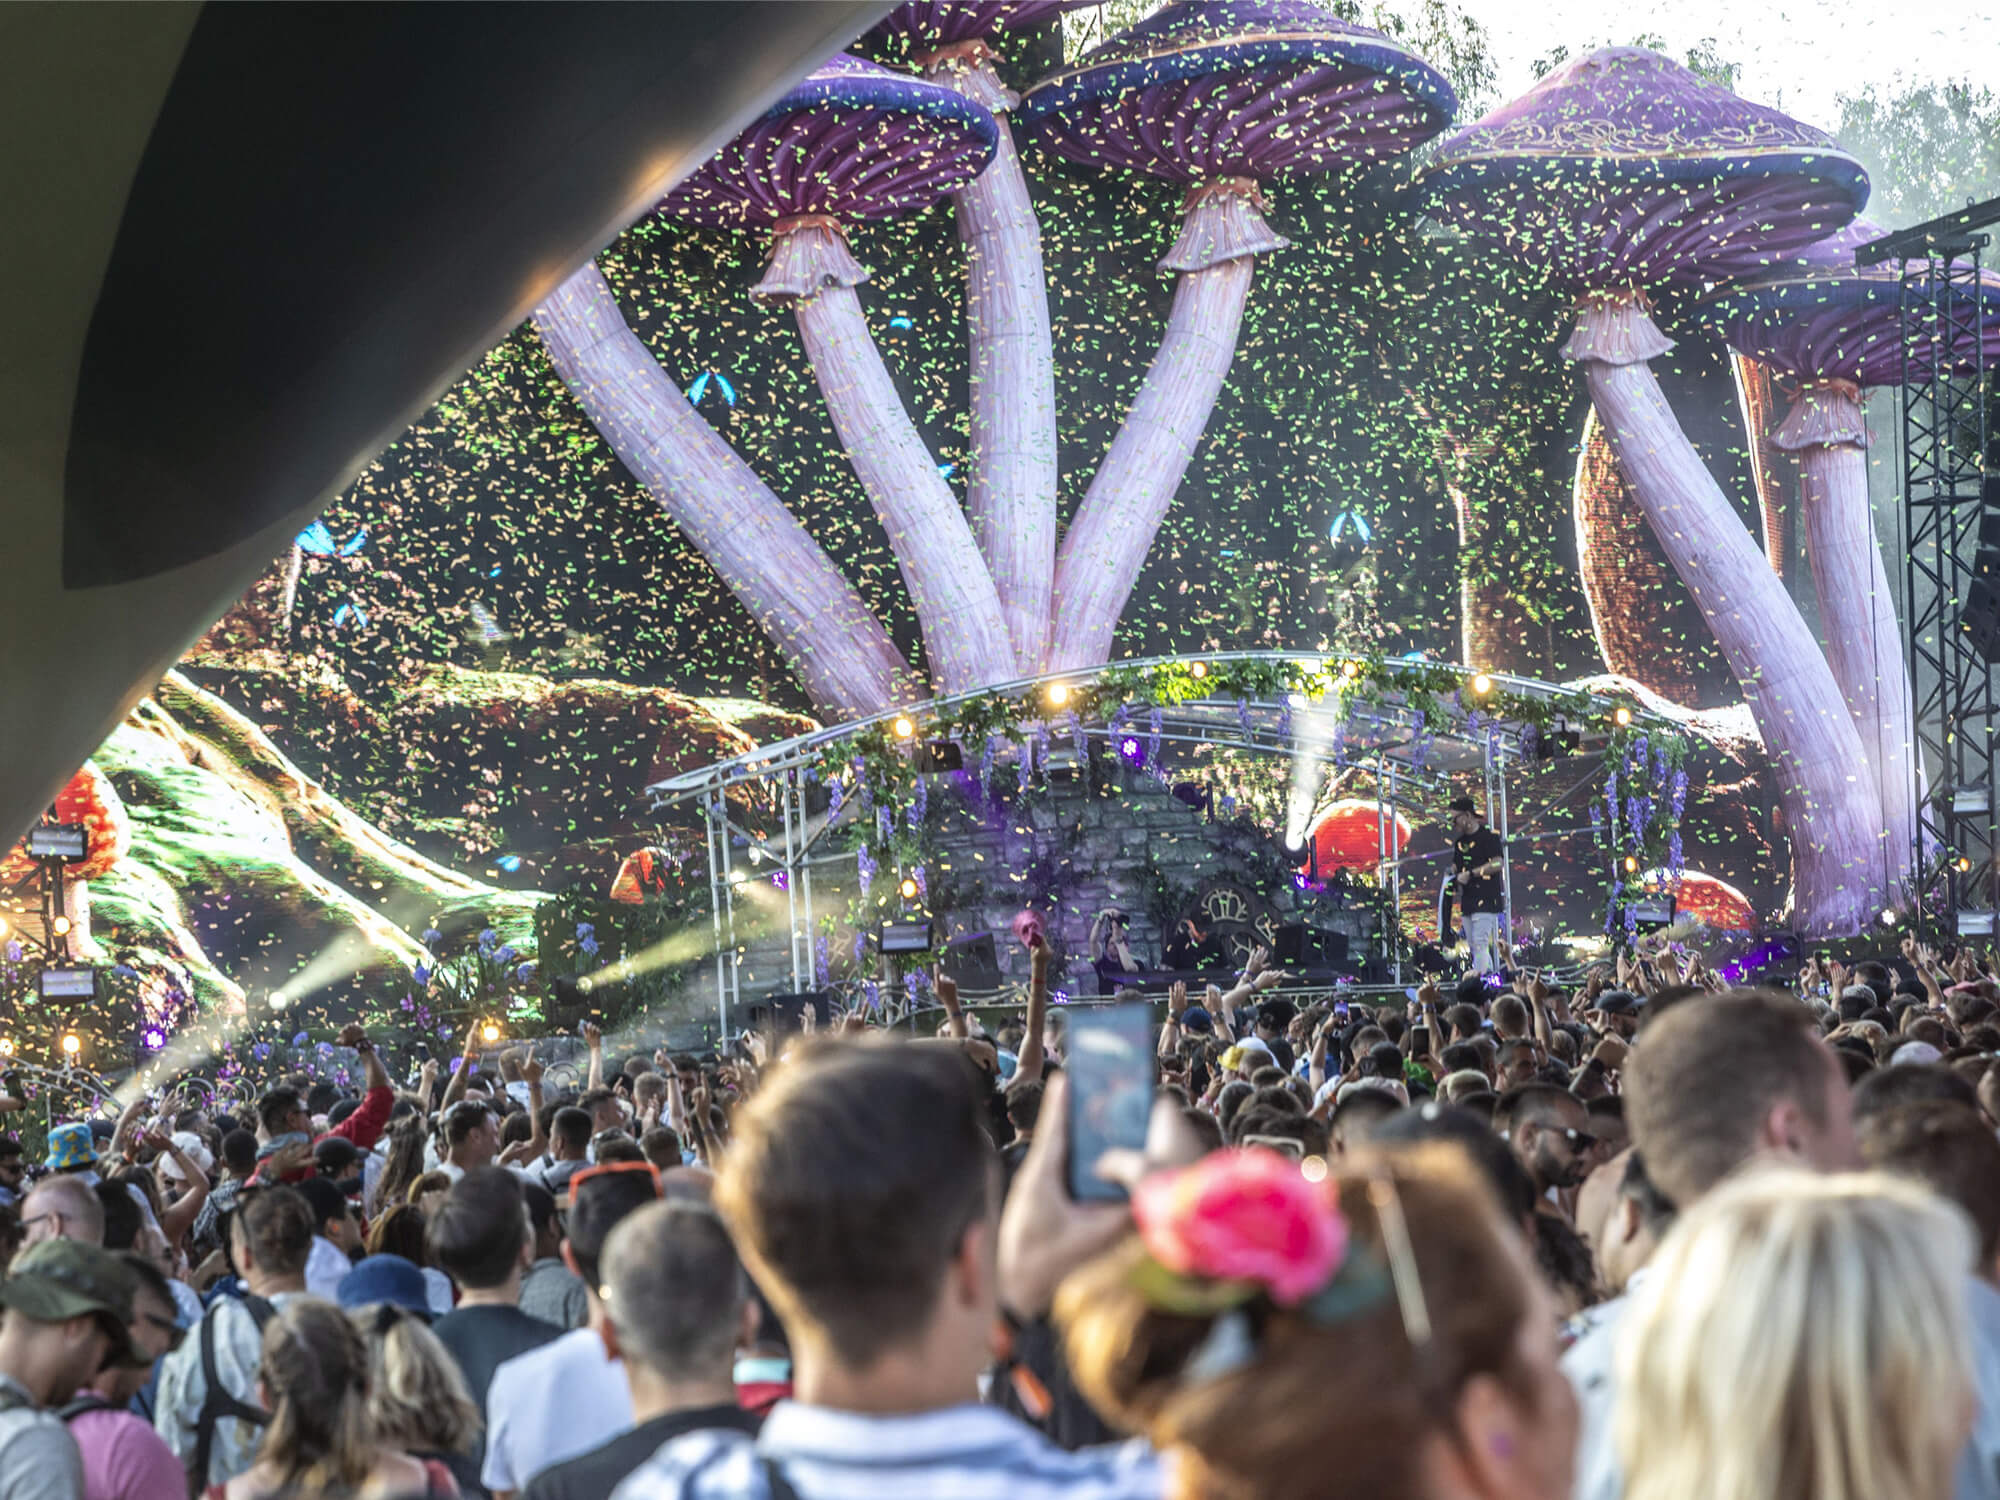 A crowd at Tomorrowland festival. A giant sculpture of mushrooms surrounds a stage.